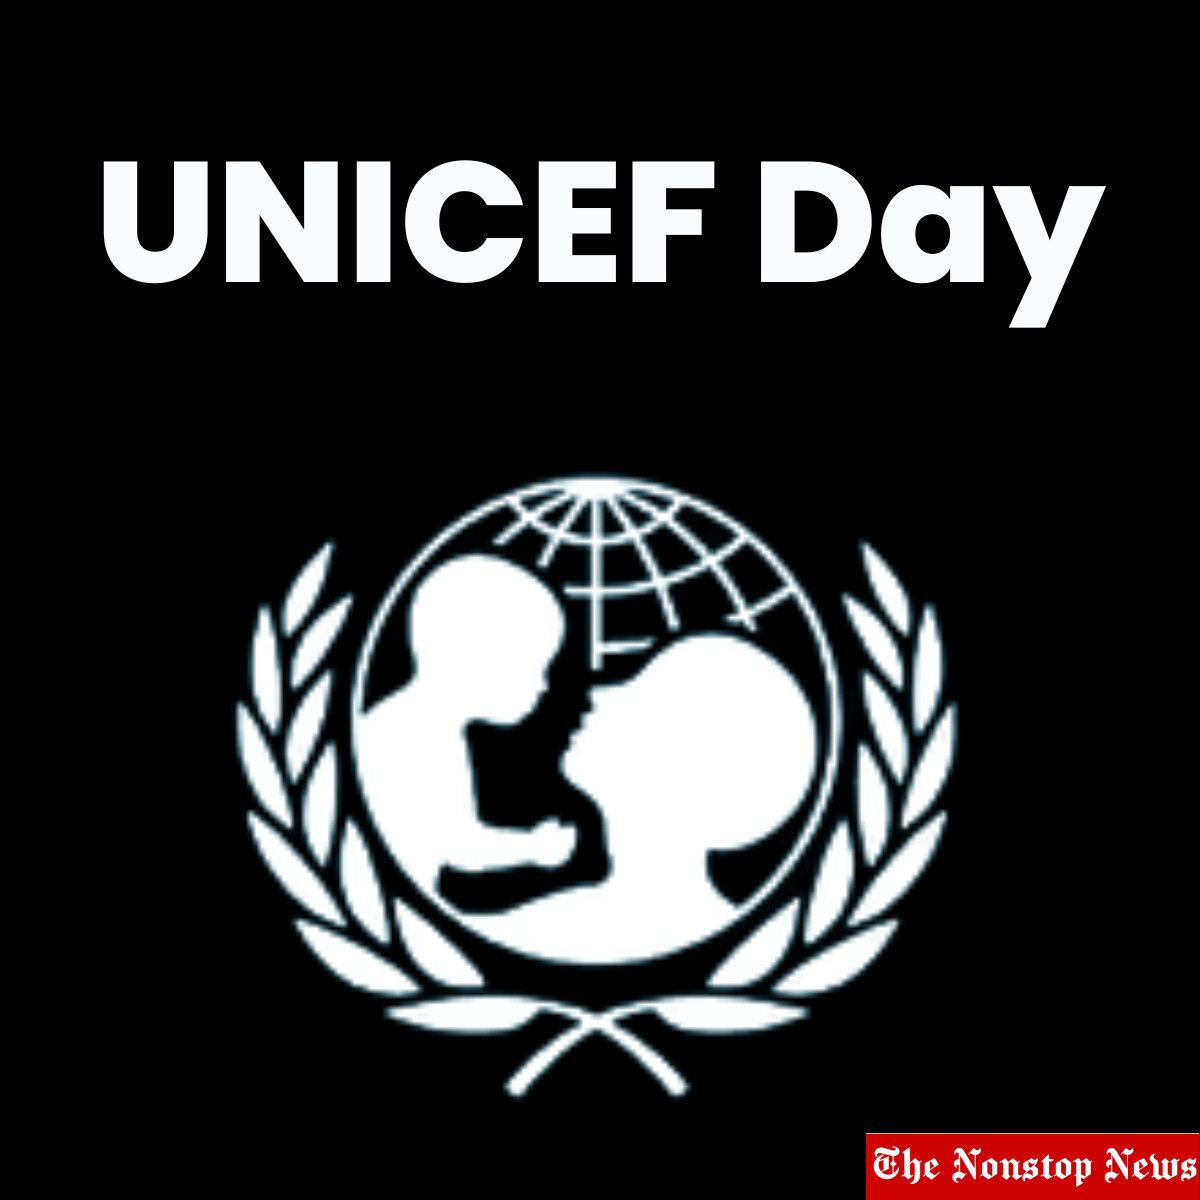 UNICEF Day 2022: Current Theme, HD Images, Messages, Quotes, Banners, Posters, Greetings, and Slogans